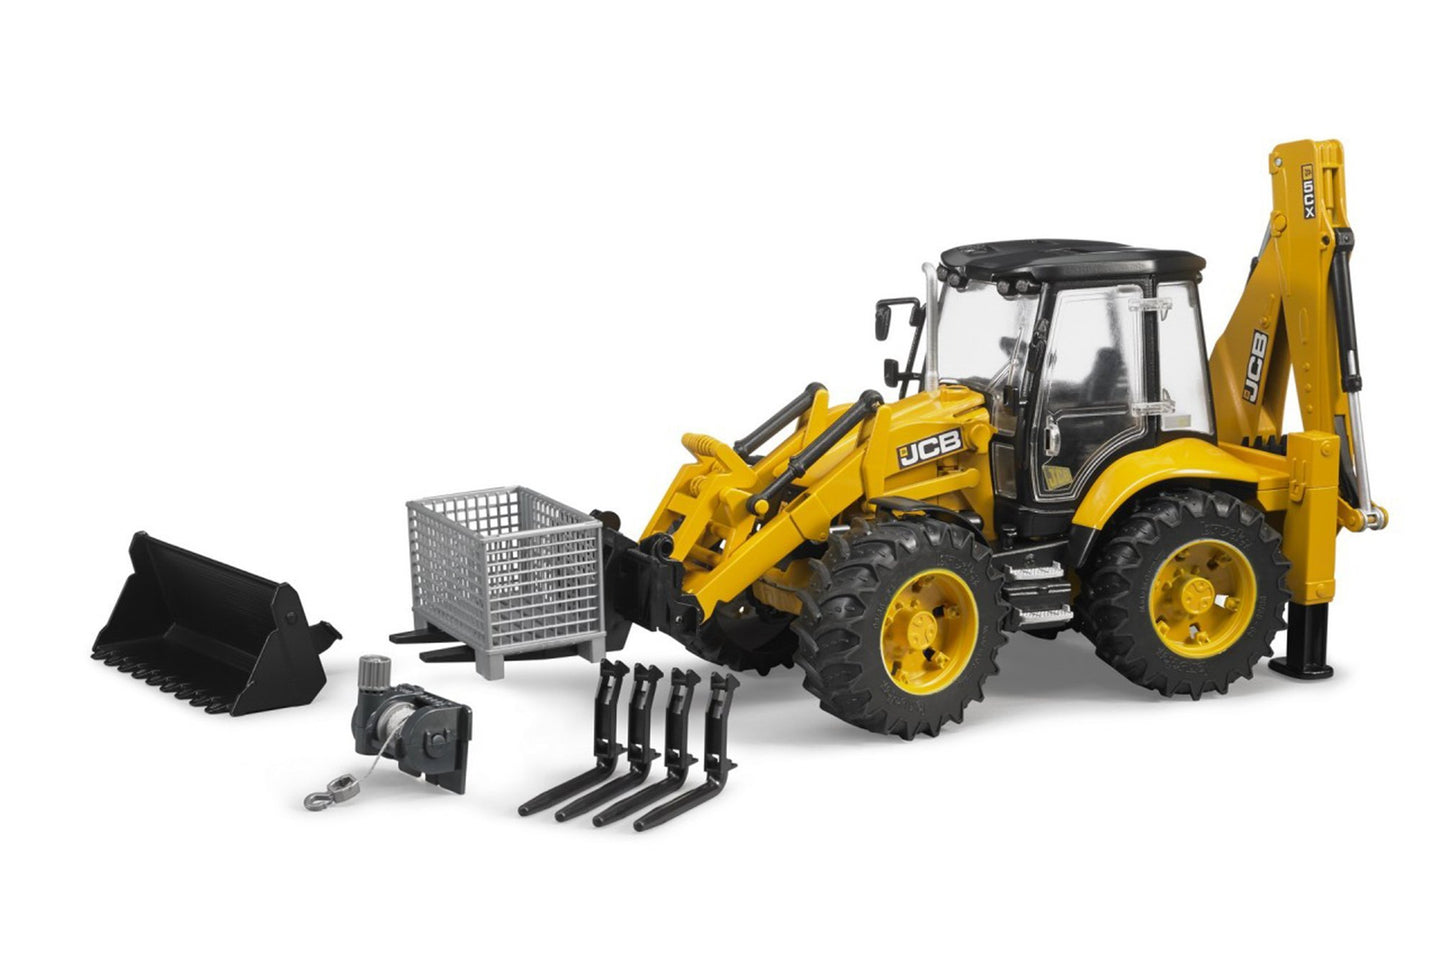 B02454 Bruder JCB 5CX Eco Backhoe Loader - Accessories available separately.